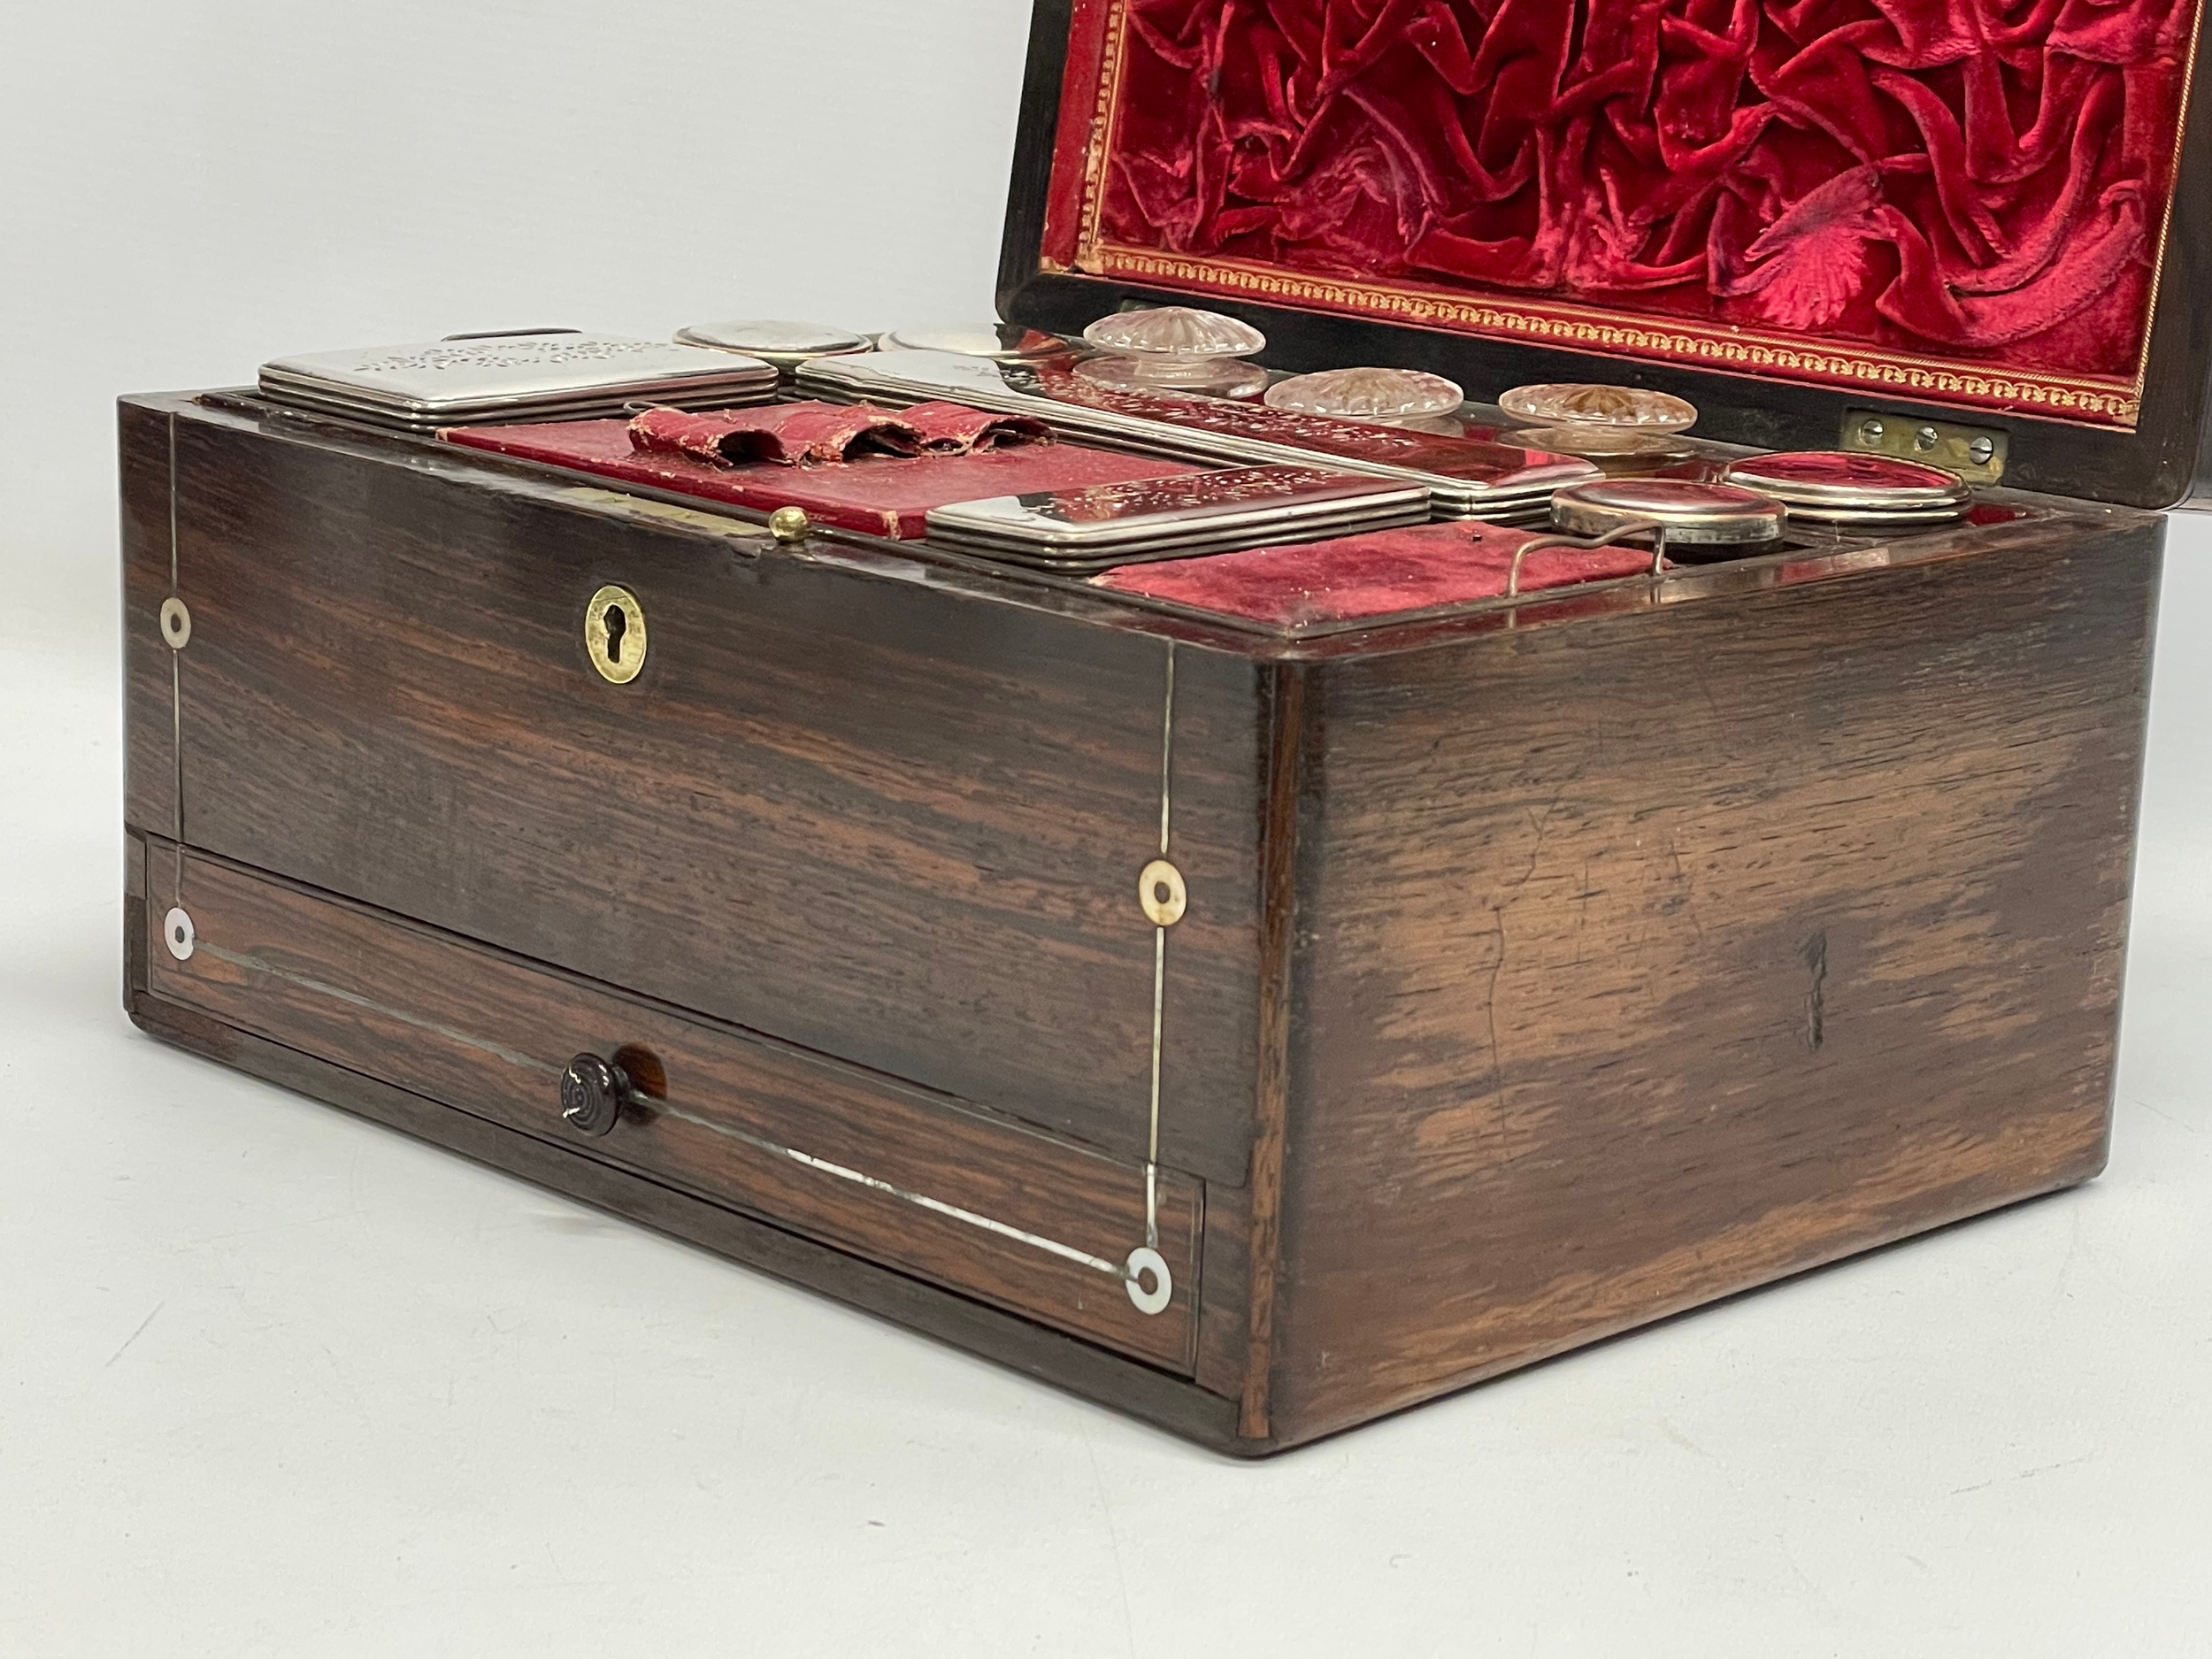 A Victorian rosewood vanity box with Mother of Pearl inlay and cut glass bottles with silver - Image 11 of 11